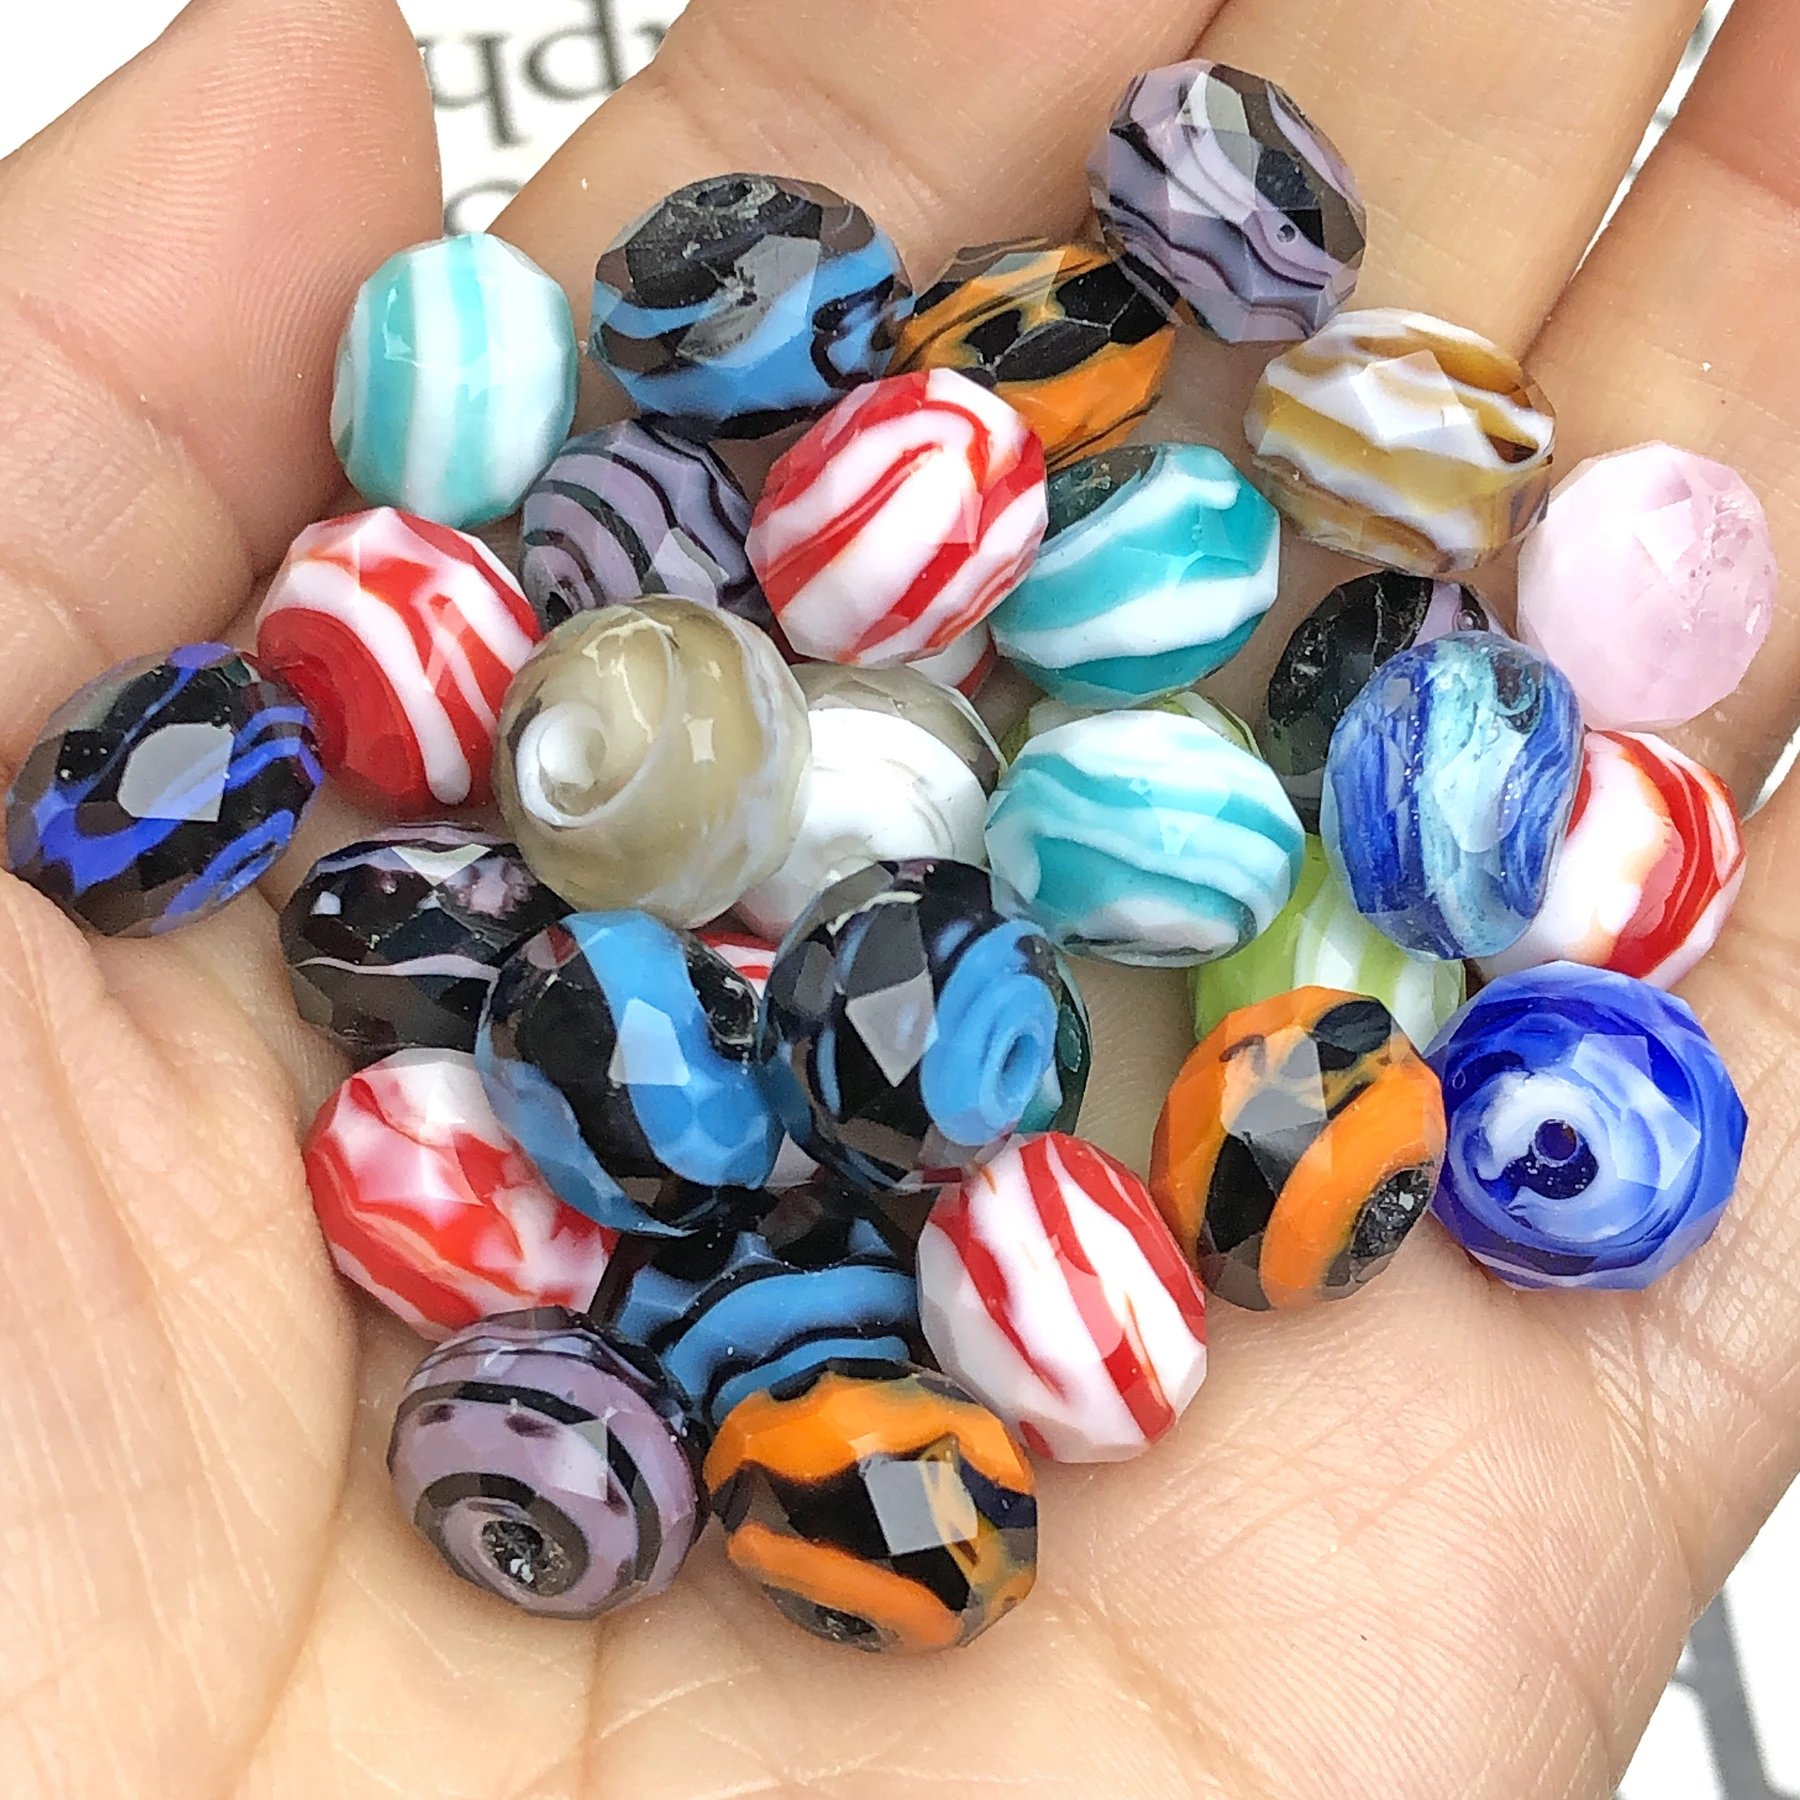 10mm Blue White Murano Transparent Faceted Rondelle Wave Lampwork Crystal  Glass Beads For Bracelet Making Women Diy Accessories - Beads - AliExpress